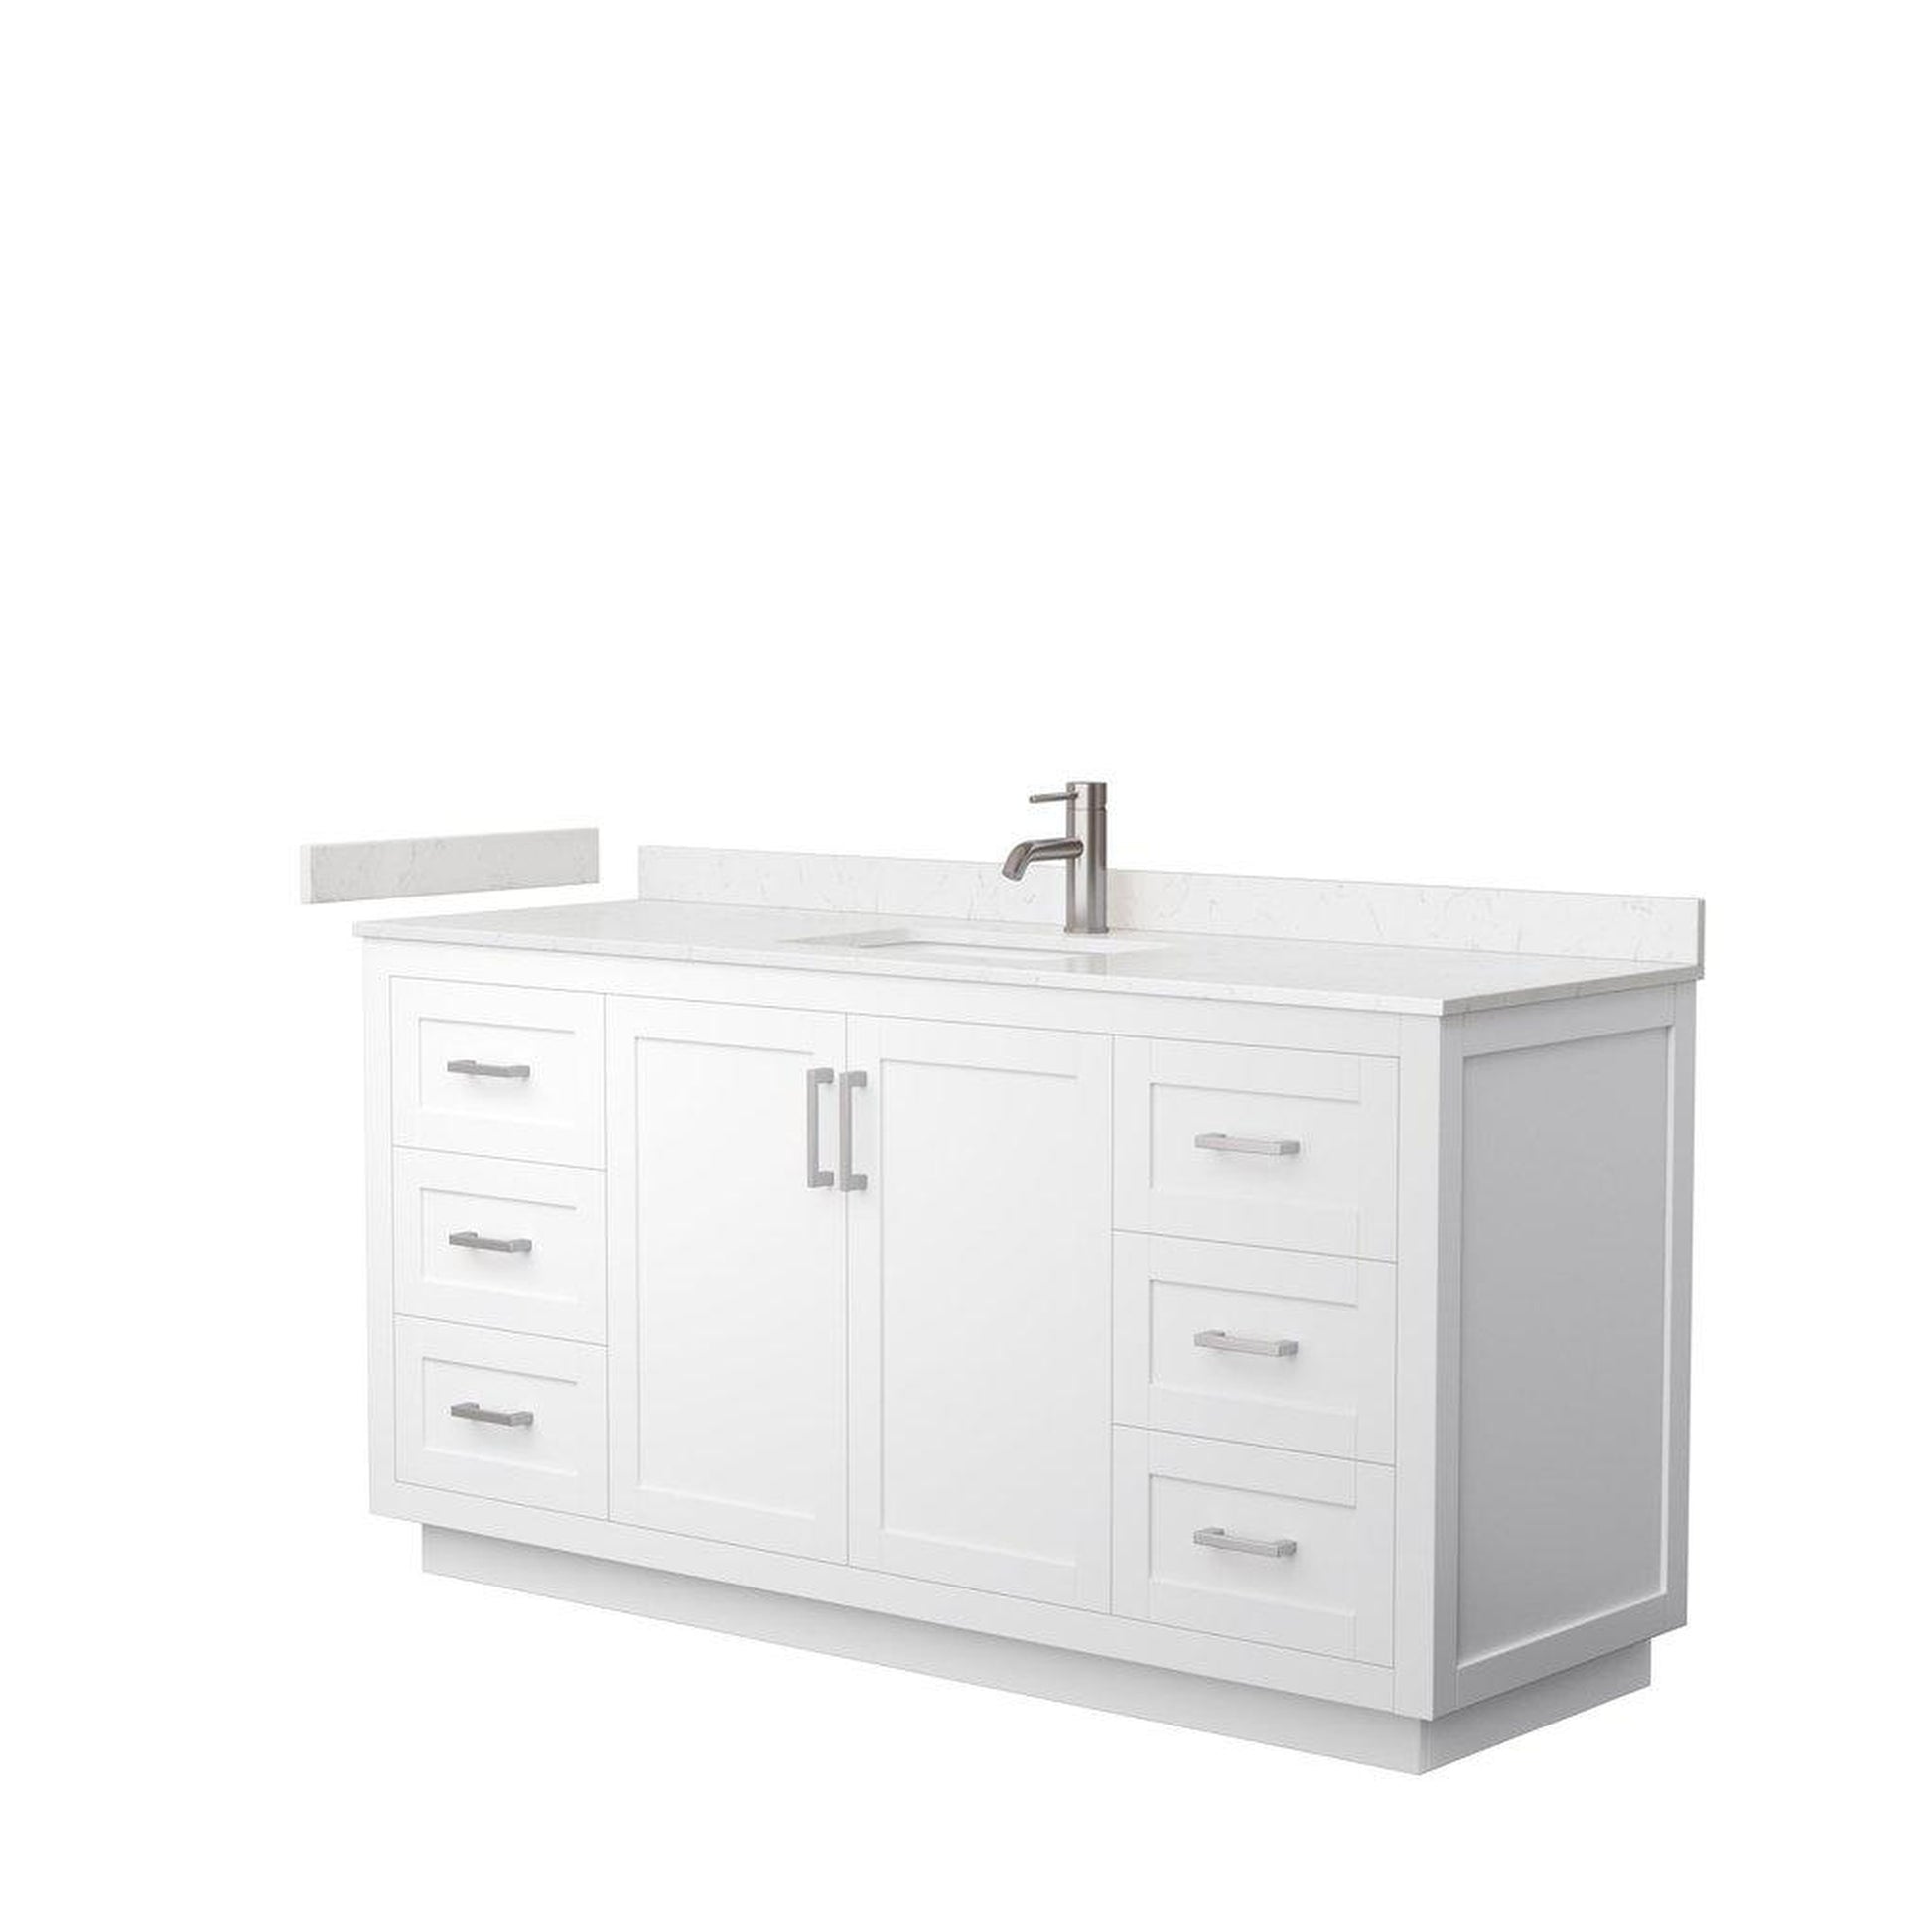 Wyndham Collection Miranda 66" Single Bathroom White Vanity Set With Light-Vein Carrara Cultured Marble Countertop, Undermount Square Sink, And Brushed Nickel Trim